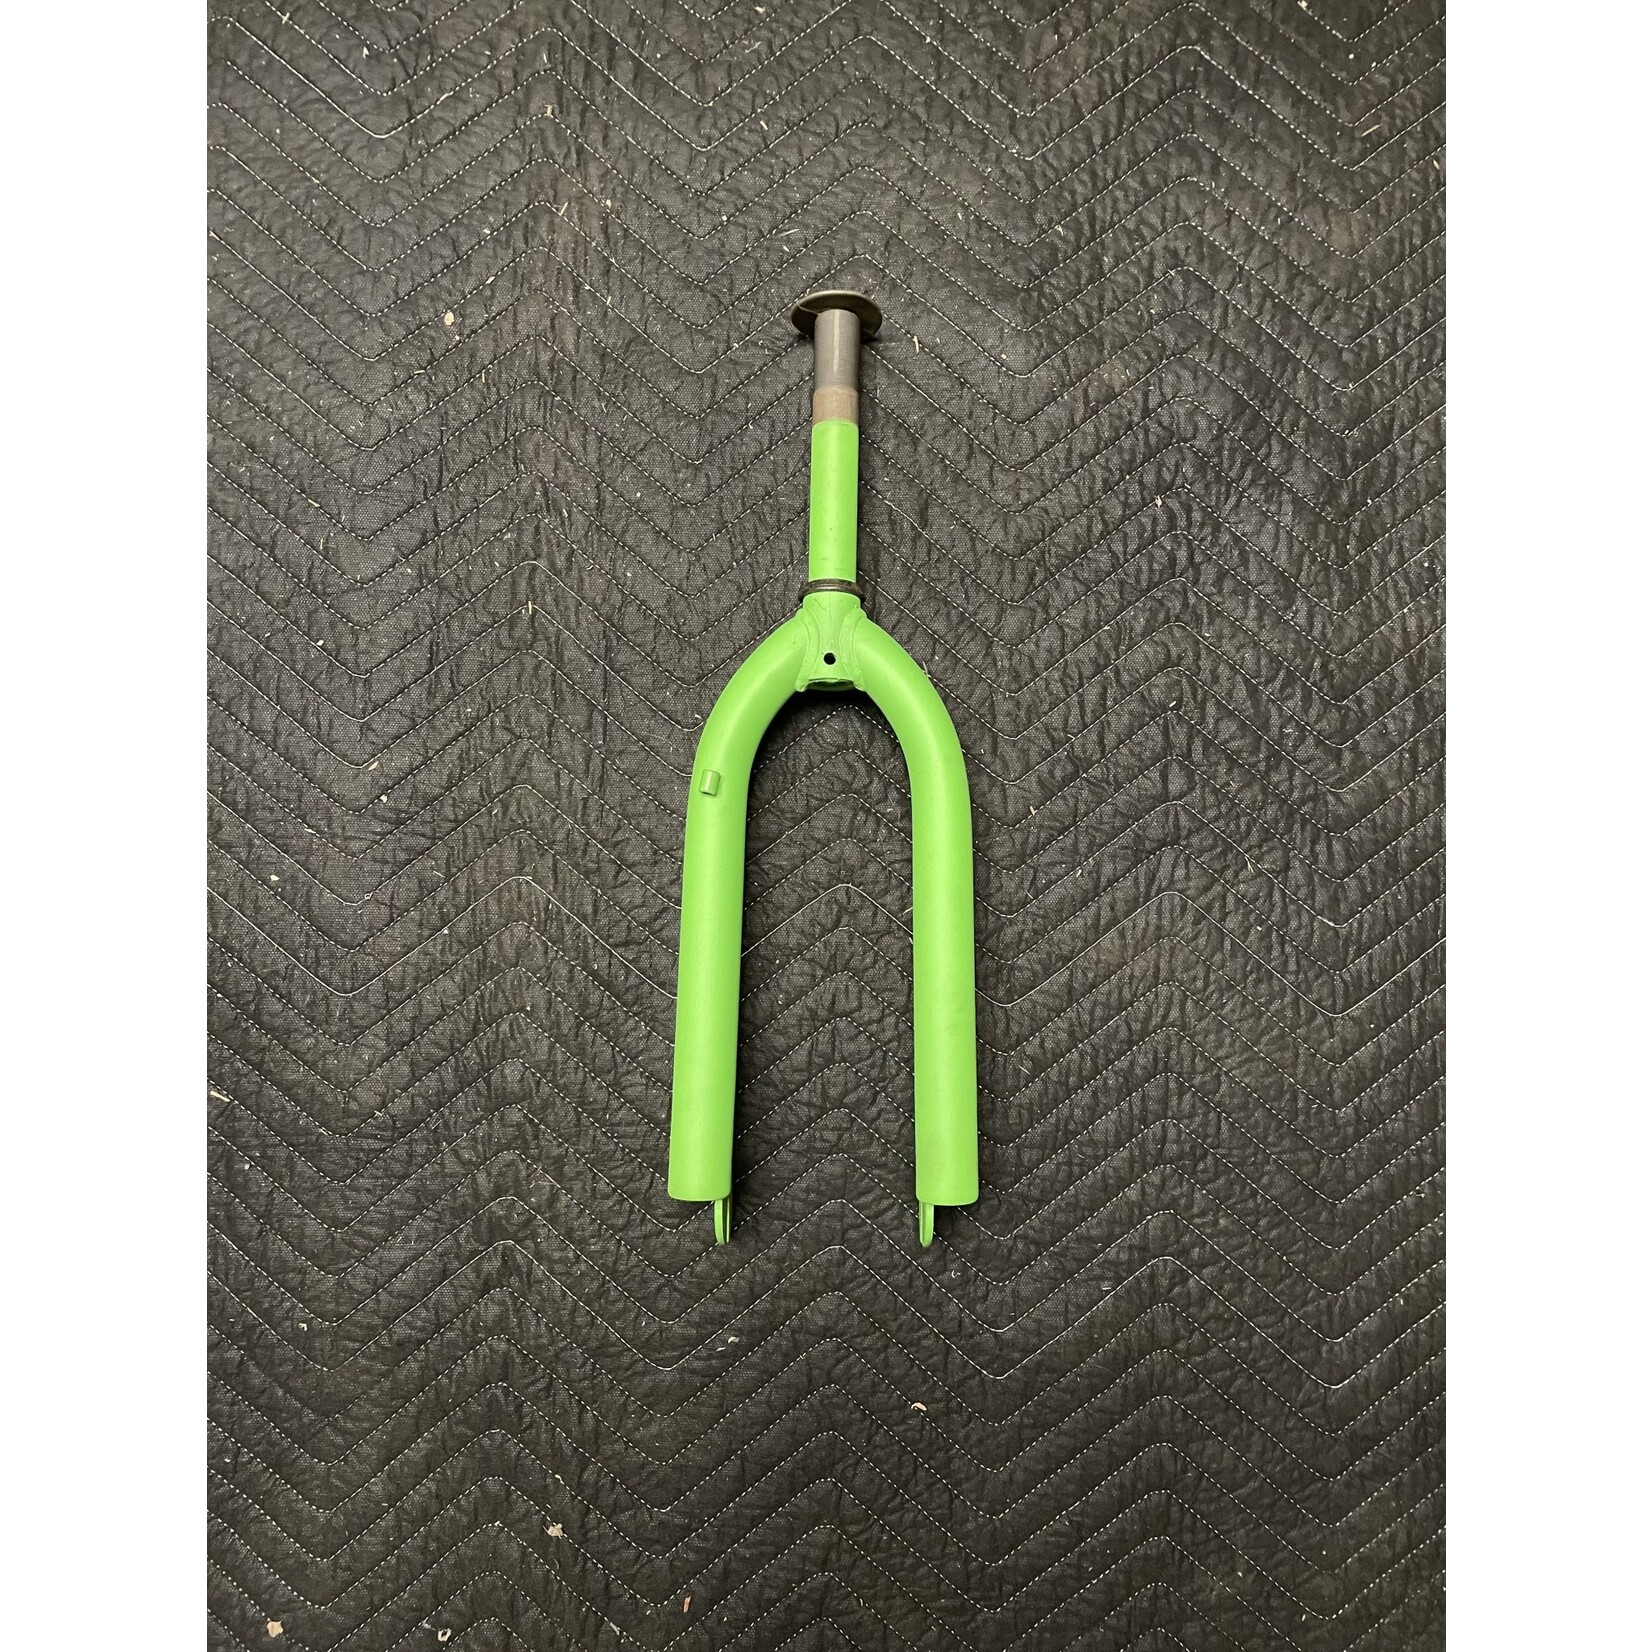 ZR20 1” x 6” Threaded 20” Bicycle Fork (Green)